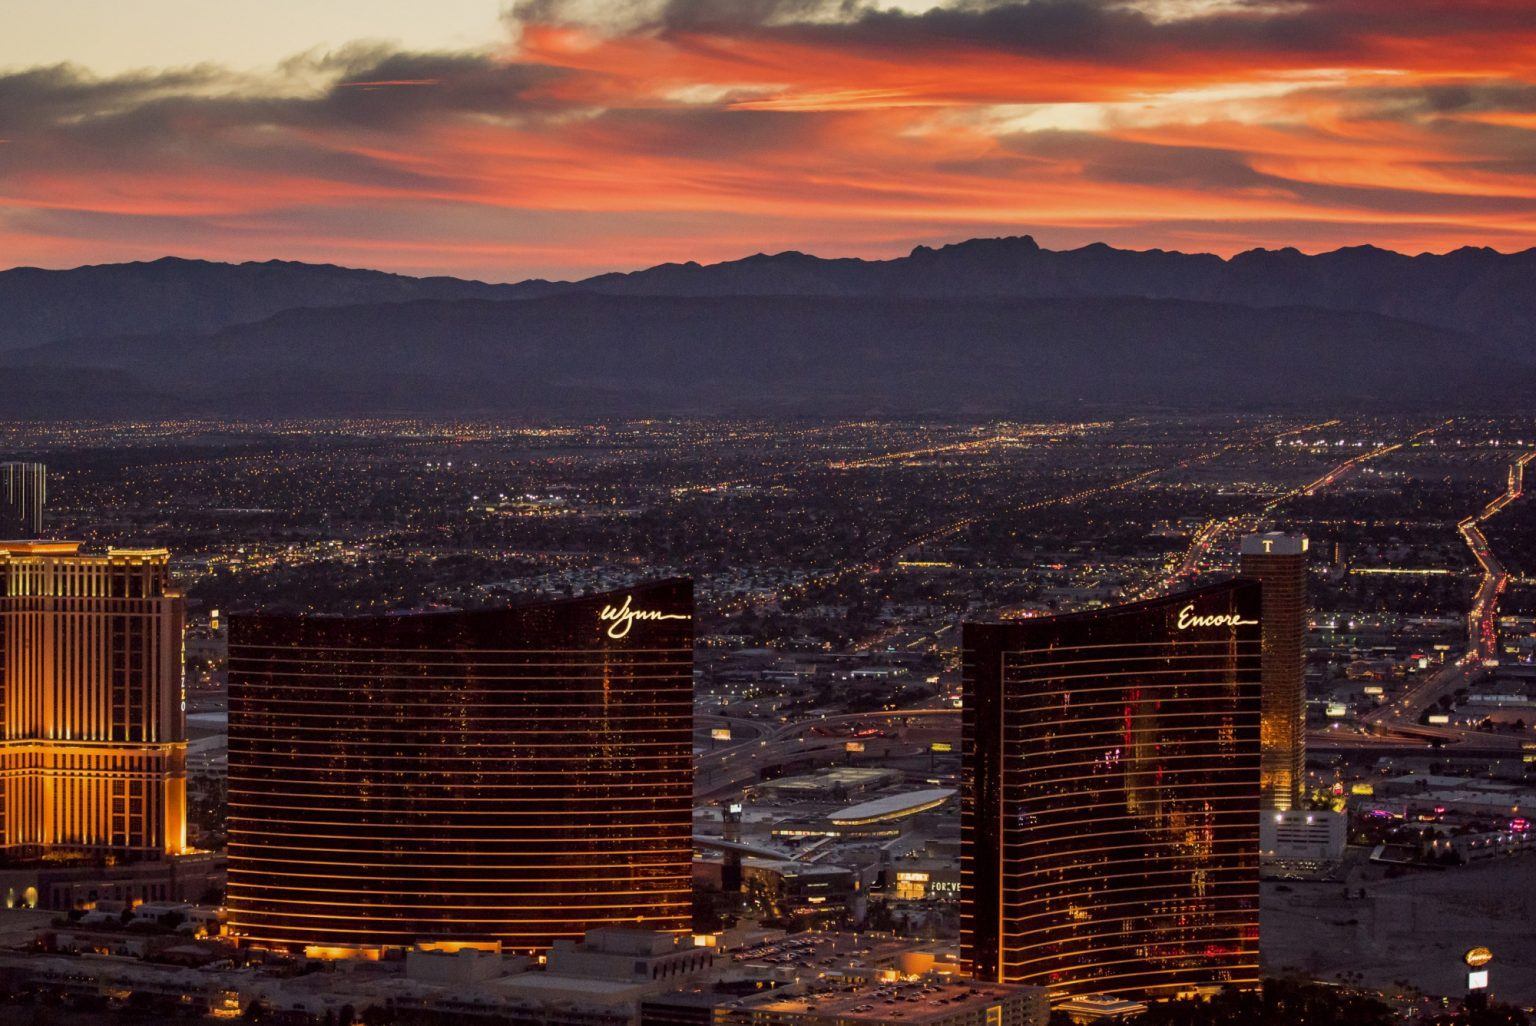 Wynn Las Vegas to Remain Closed Until May 22, Says Facebookk Post